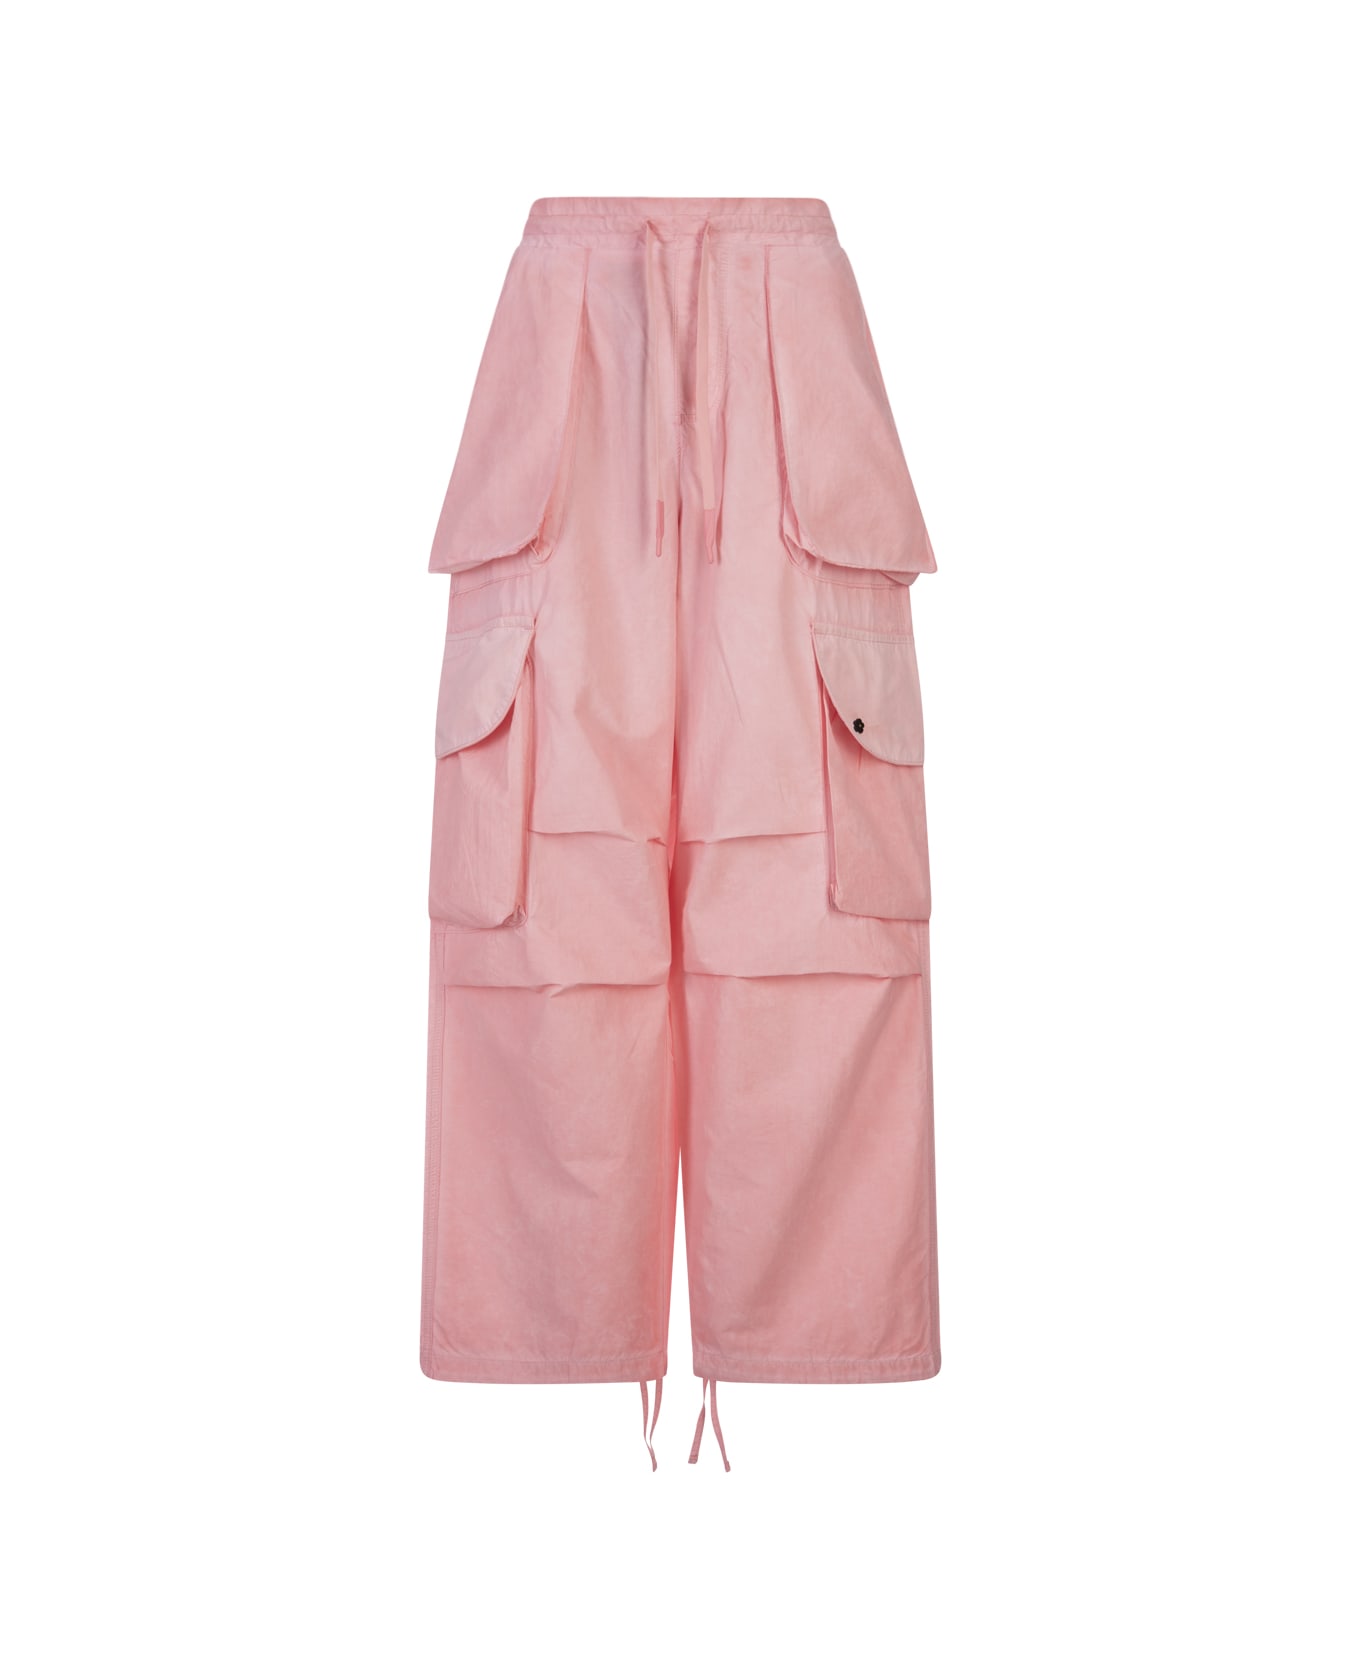 A Paper Kid Pink Cargo Trousers With Logo